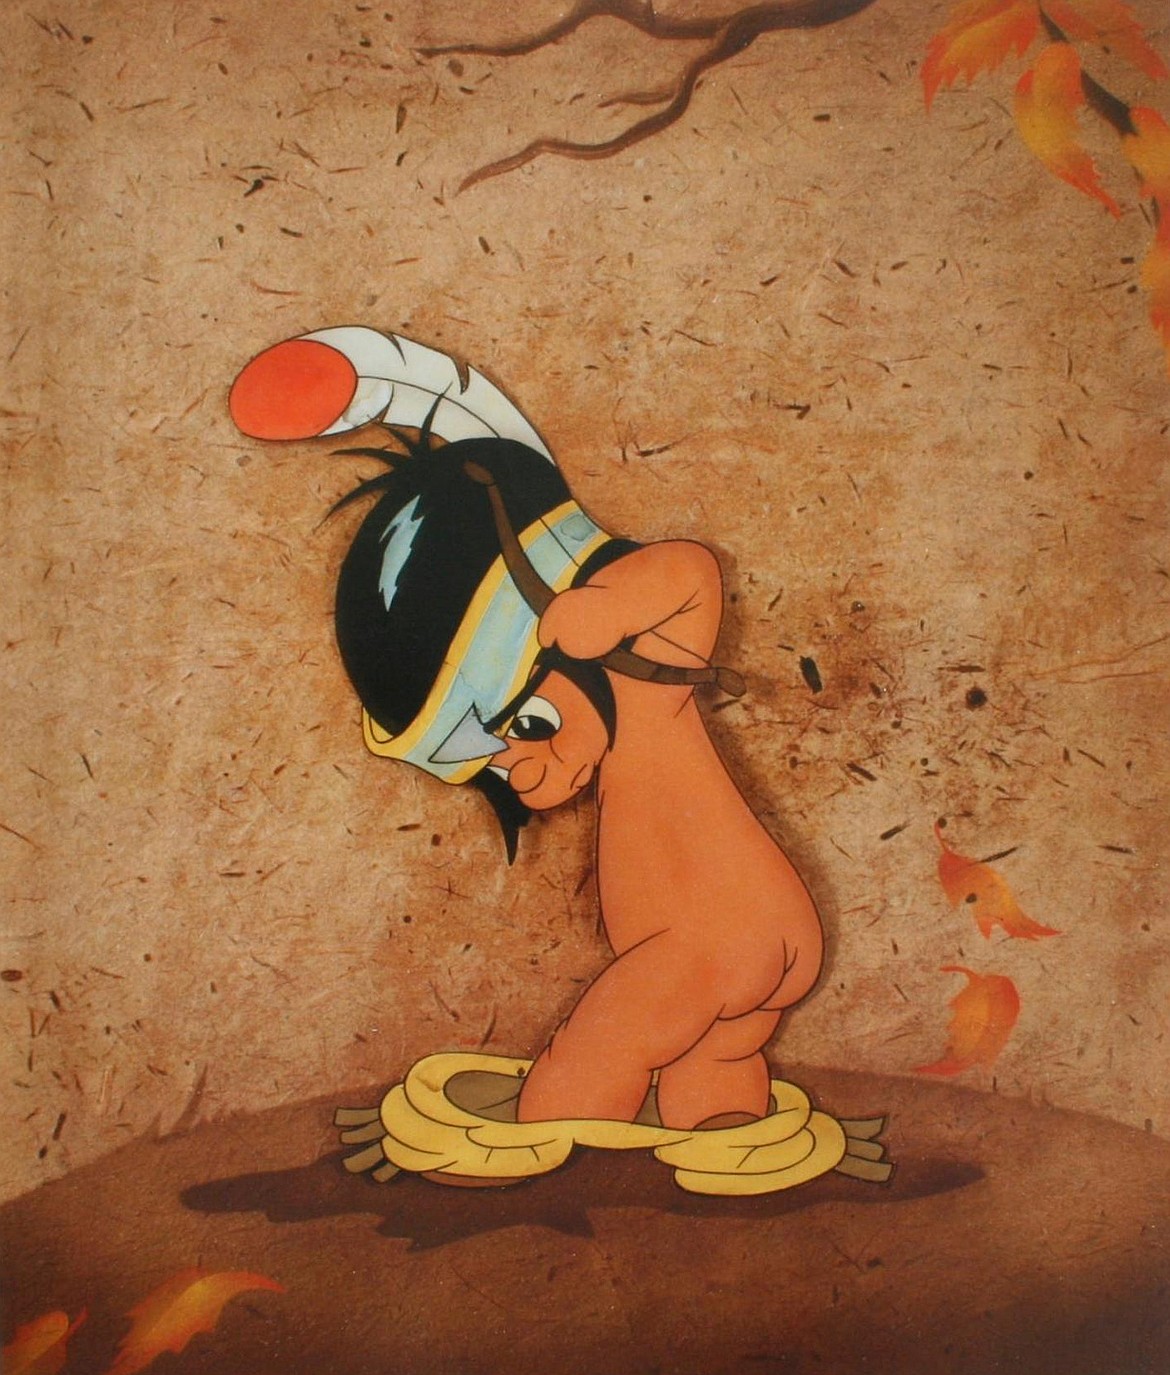 WALT DISNEY
In the Disney animated cartoon about Hiawatha, he is depicted as a little Indian boy whose pants kept falling down (1937).